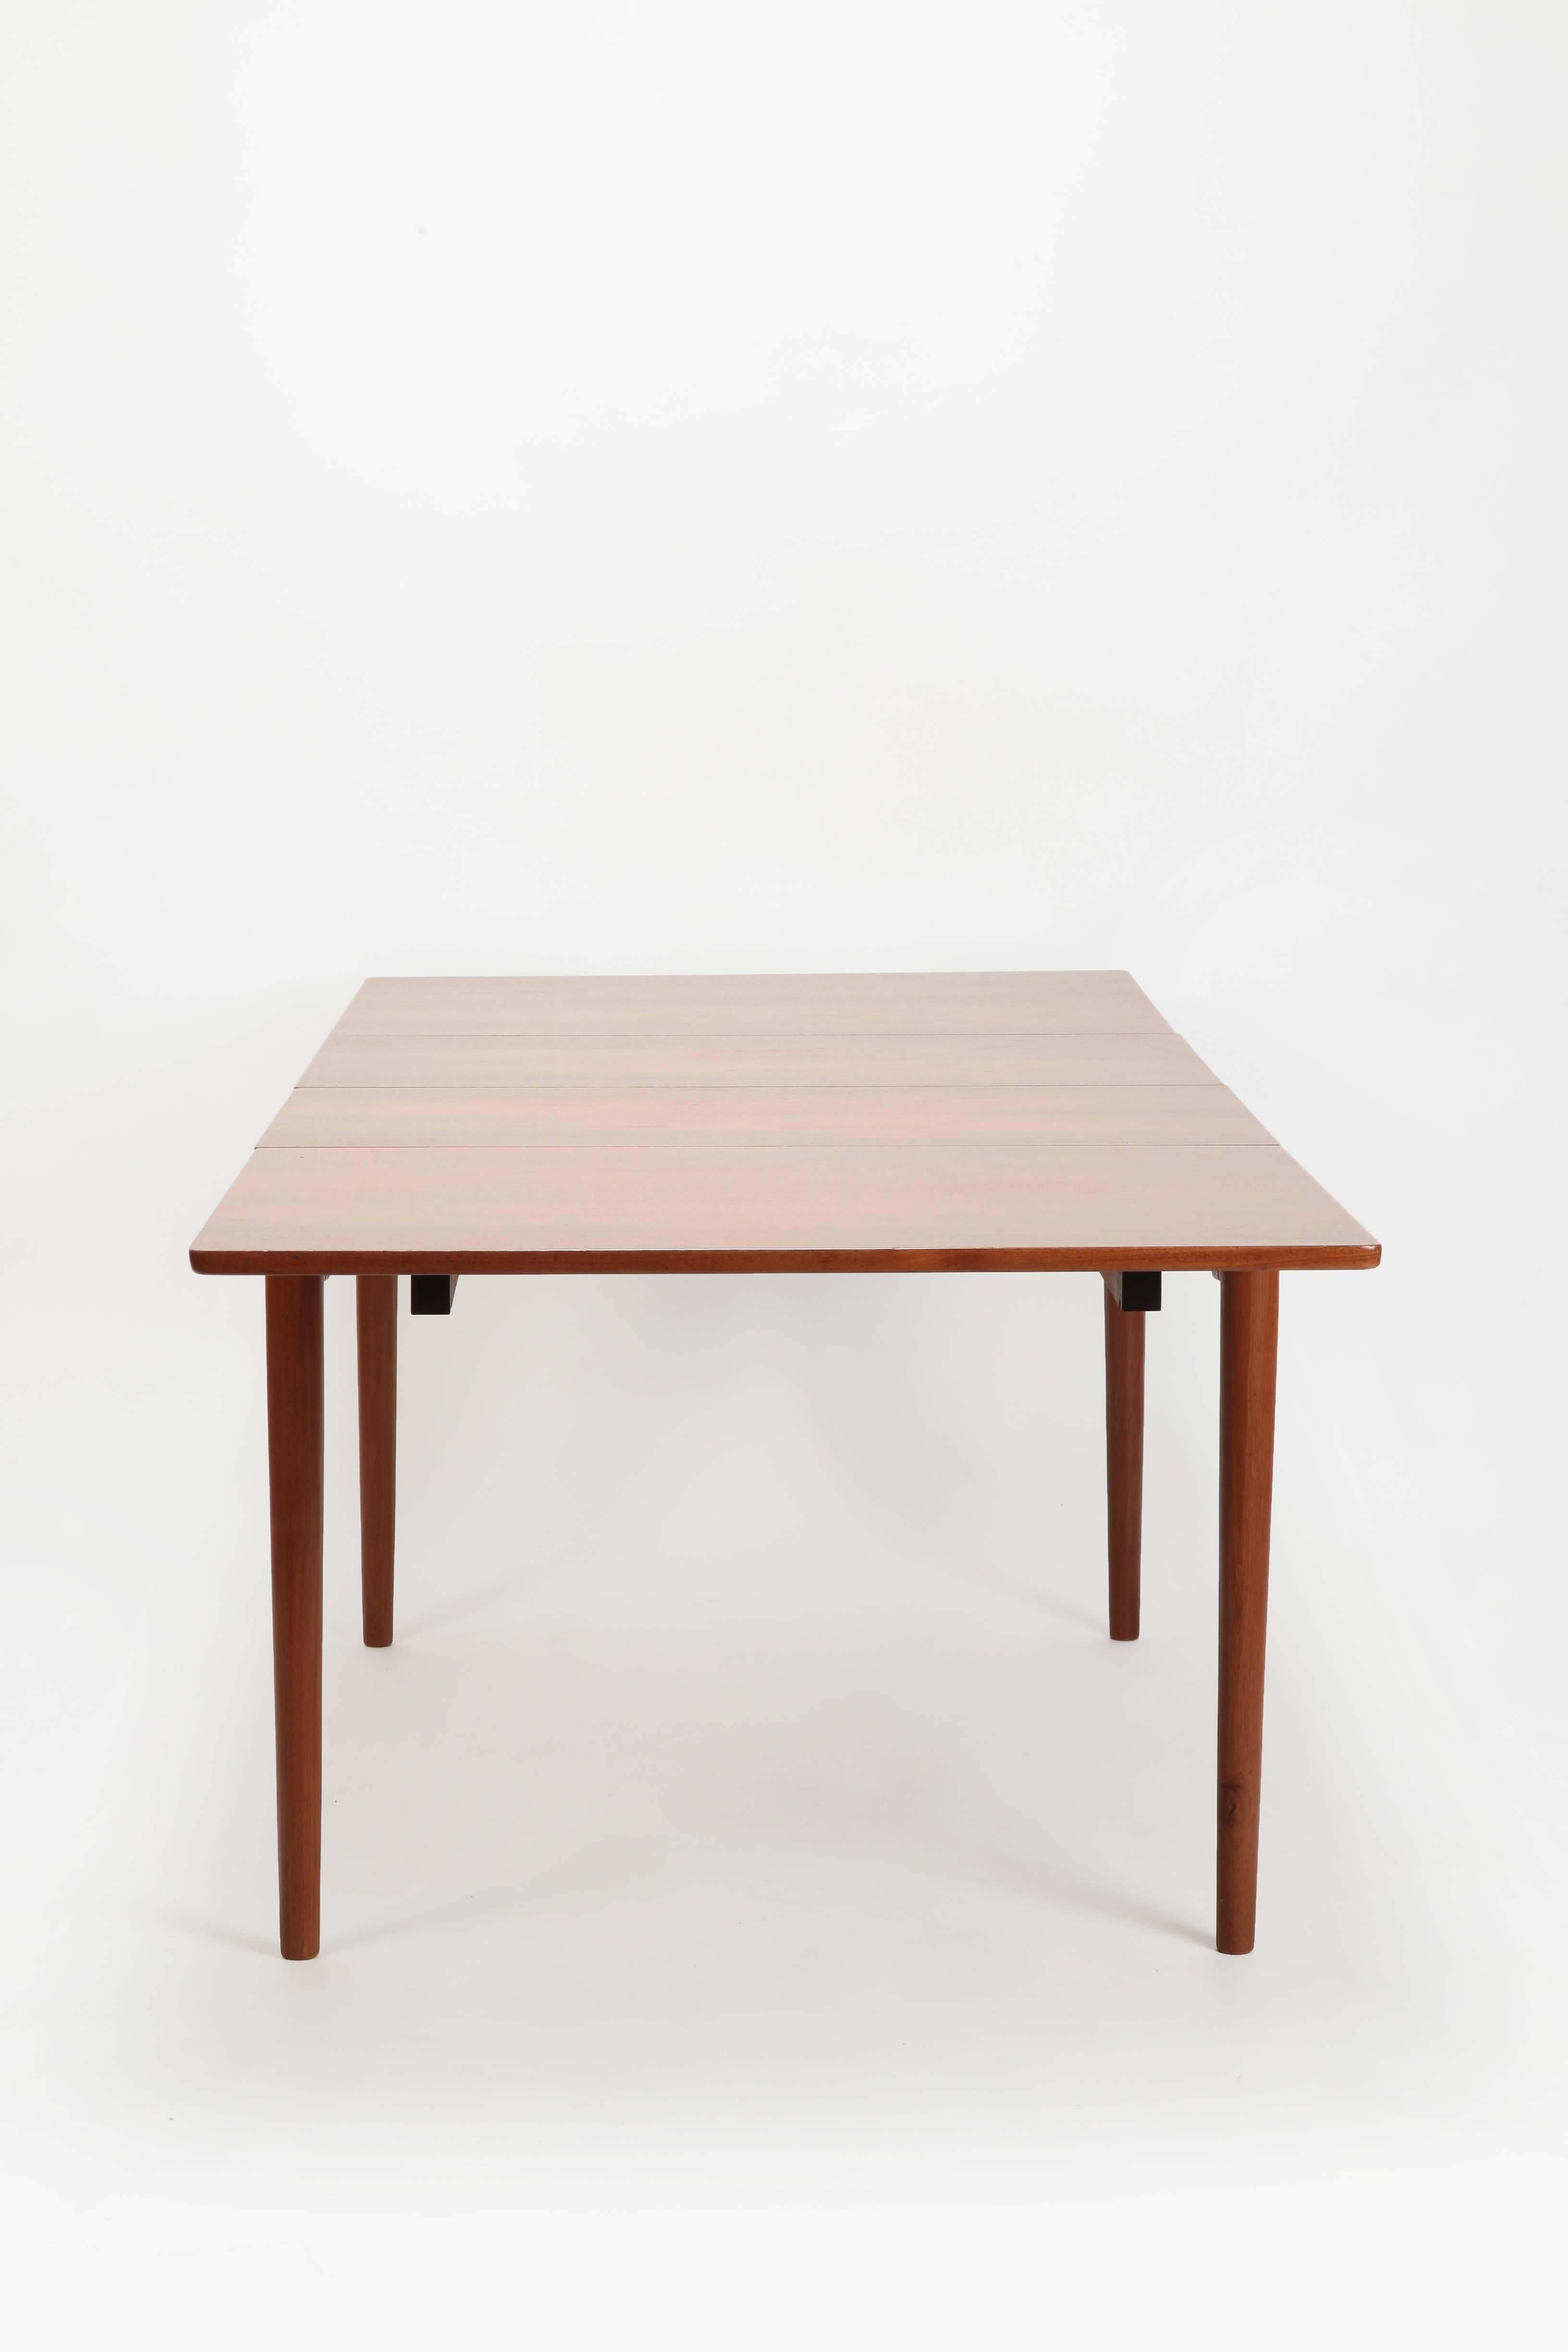 Finn Juhl Teak Dining Table Baker Furniture, 1950s In Excellent Condition In Basel, CH